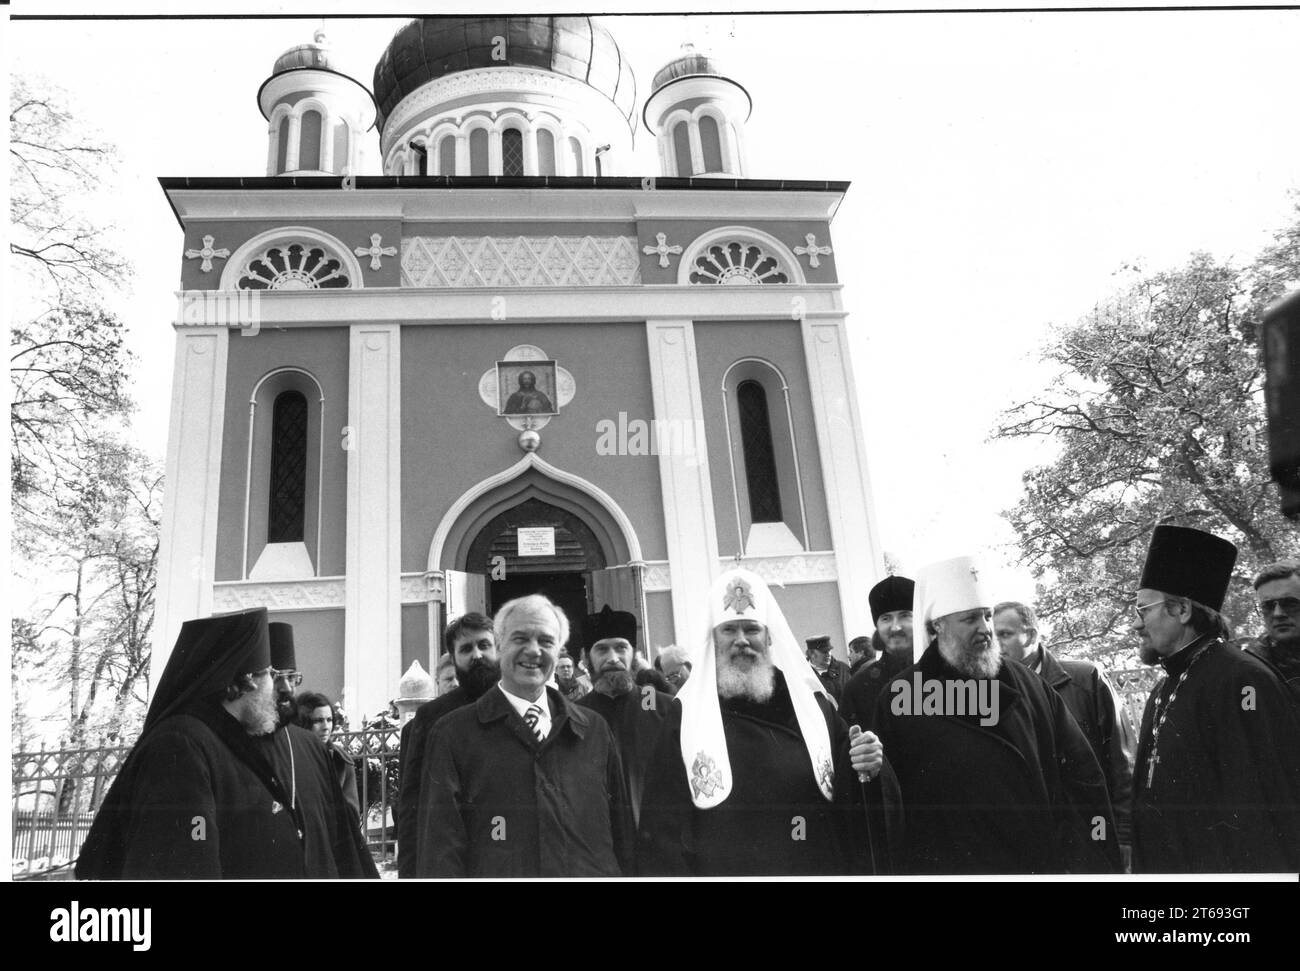 The Patriarch of the Russian Orthodox Church Alexei II with Prime Minister Manfred Stolpe (l.) on Chapel Hill at the Alexander Nevsky Church. Foreign visit. Foreign relations. Photo:MAZ/Christel Köster, 22.11.1995 [automated translation] Stock Photo